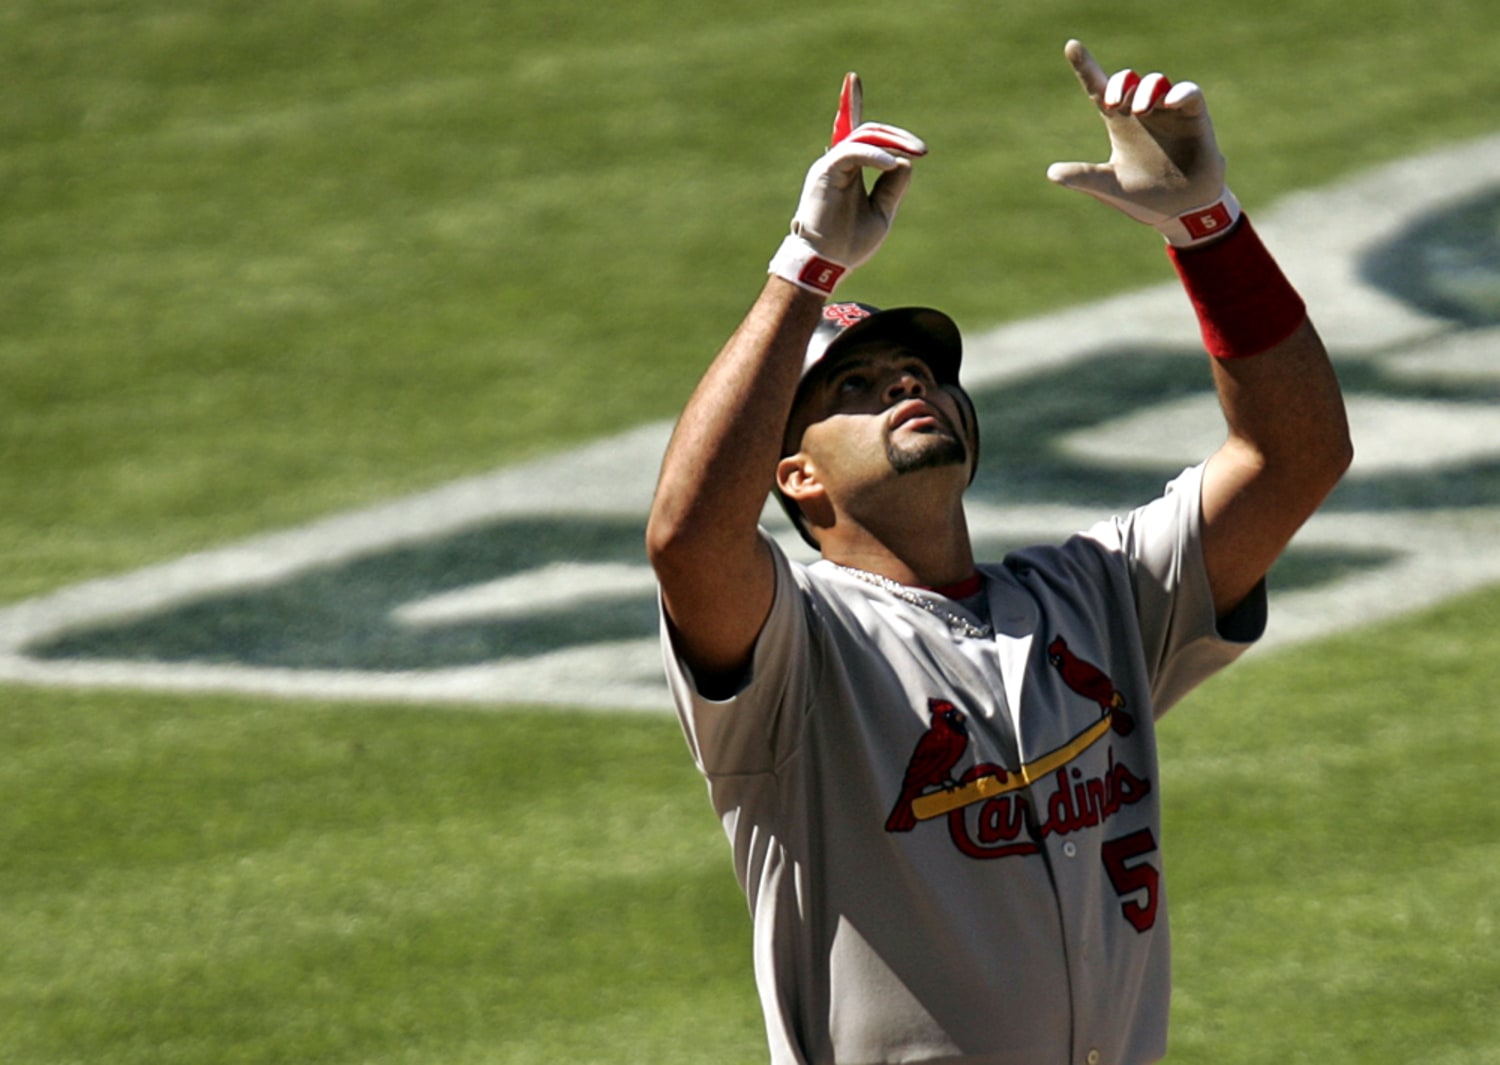 How to pitch Pujols? Prayer might work